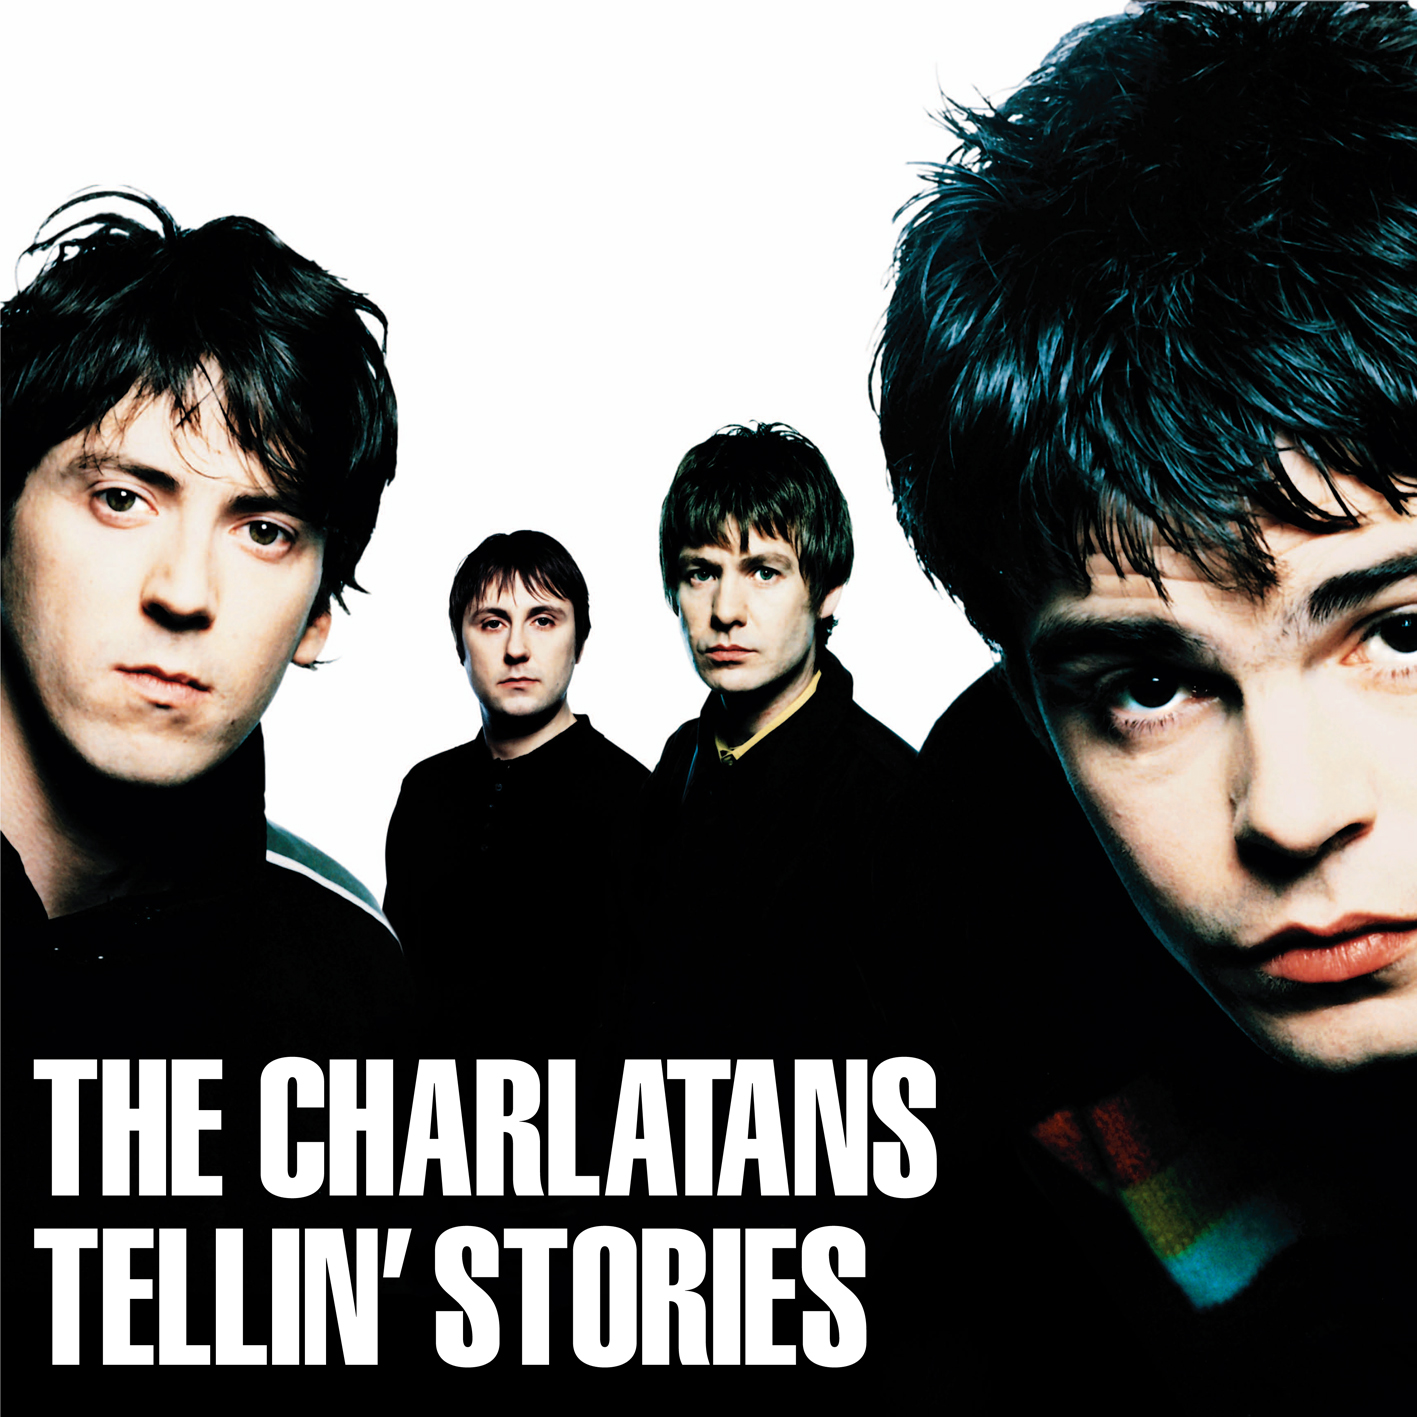 The Charlatans - Tellin' Stories (Expanded) - 2xCD